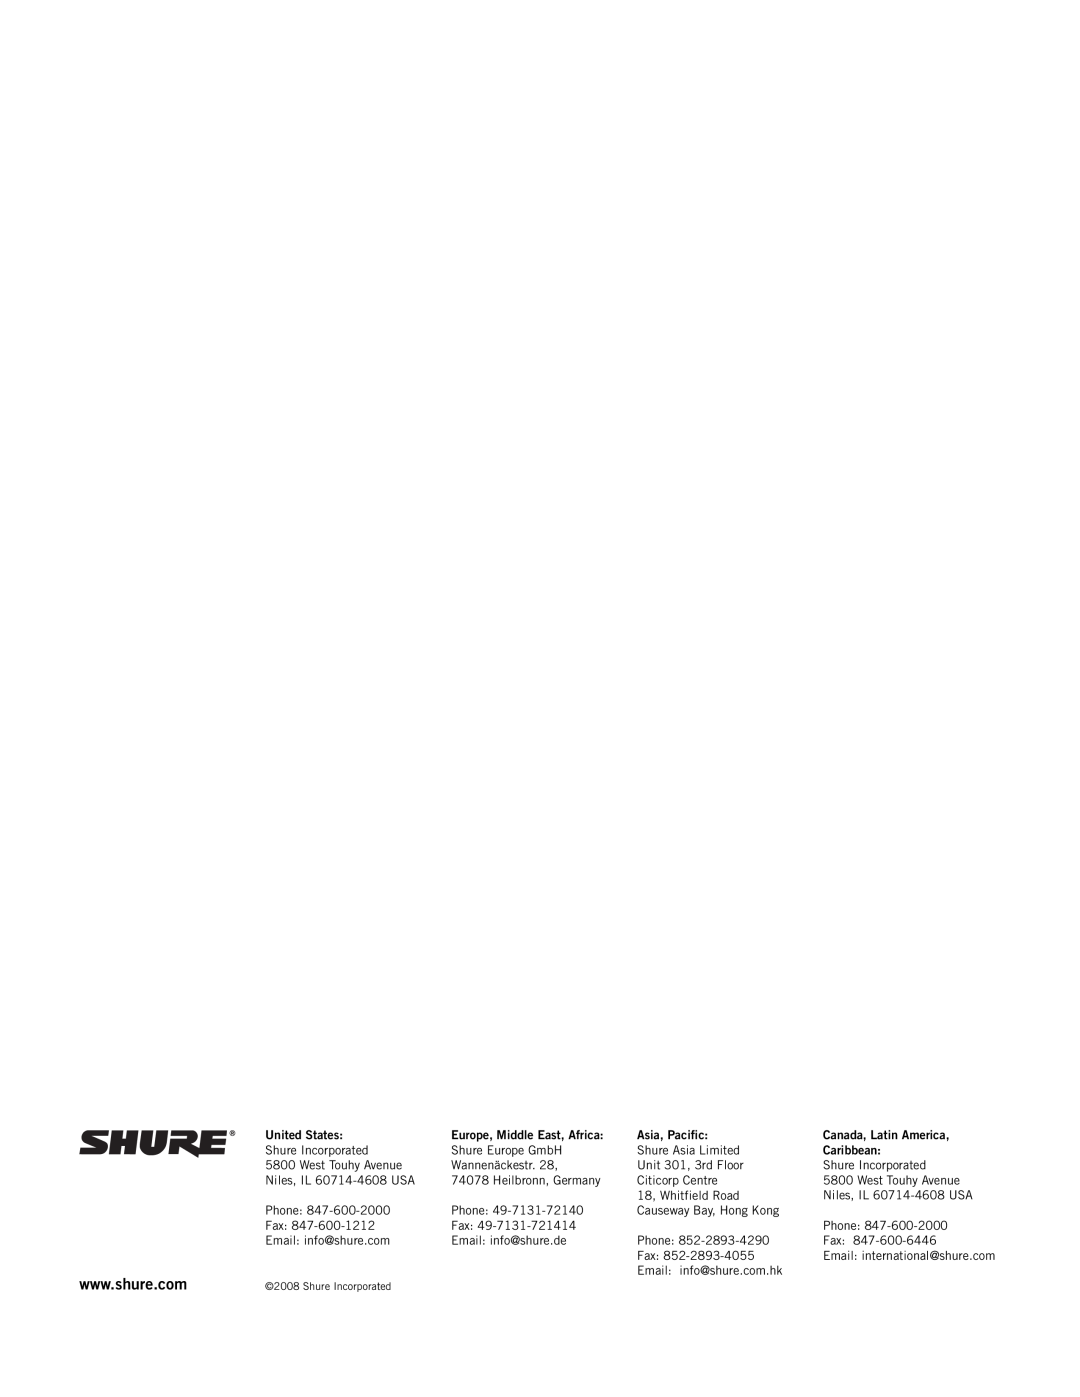 Shure P4T manual United States, Europe, Middle East, Africa, Asia, Pacific, Canada, Latin America, Caribbean 